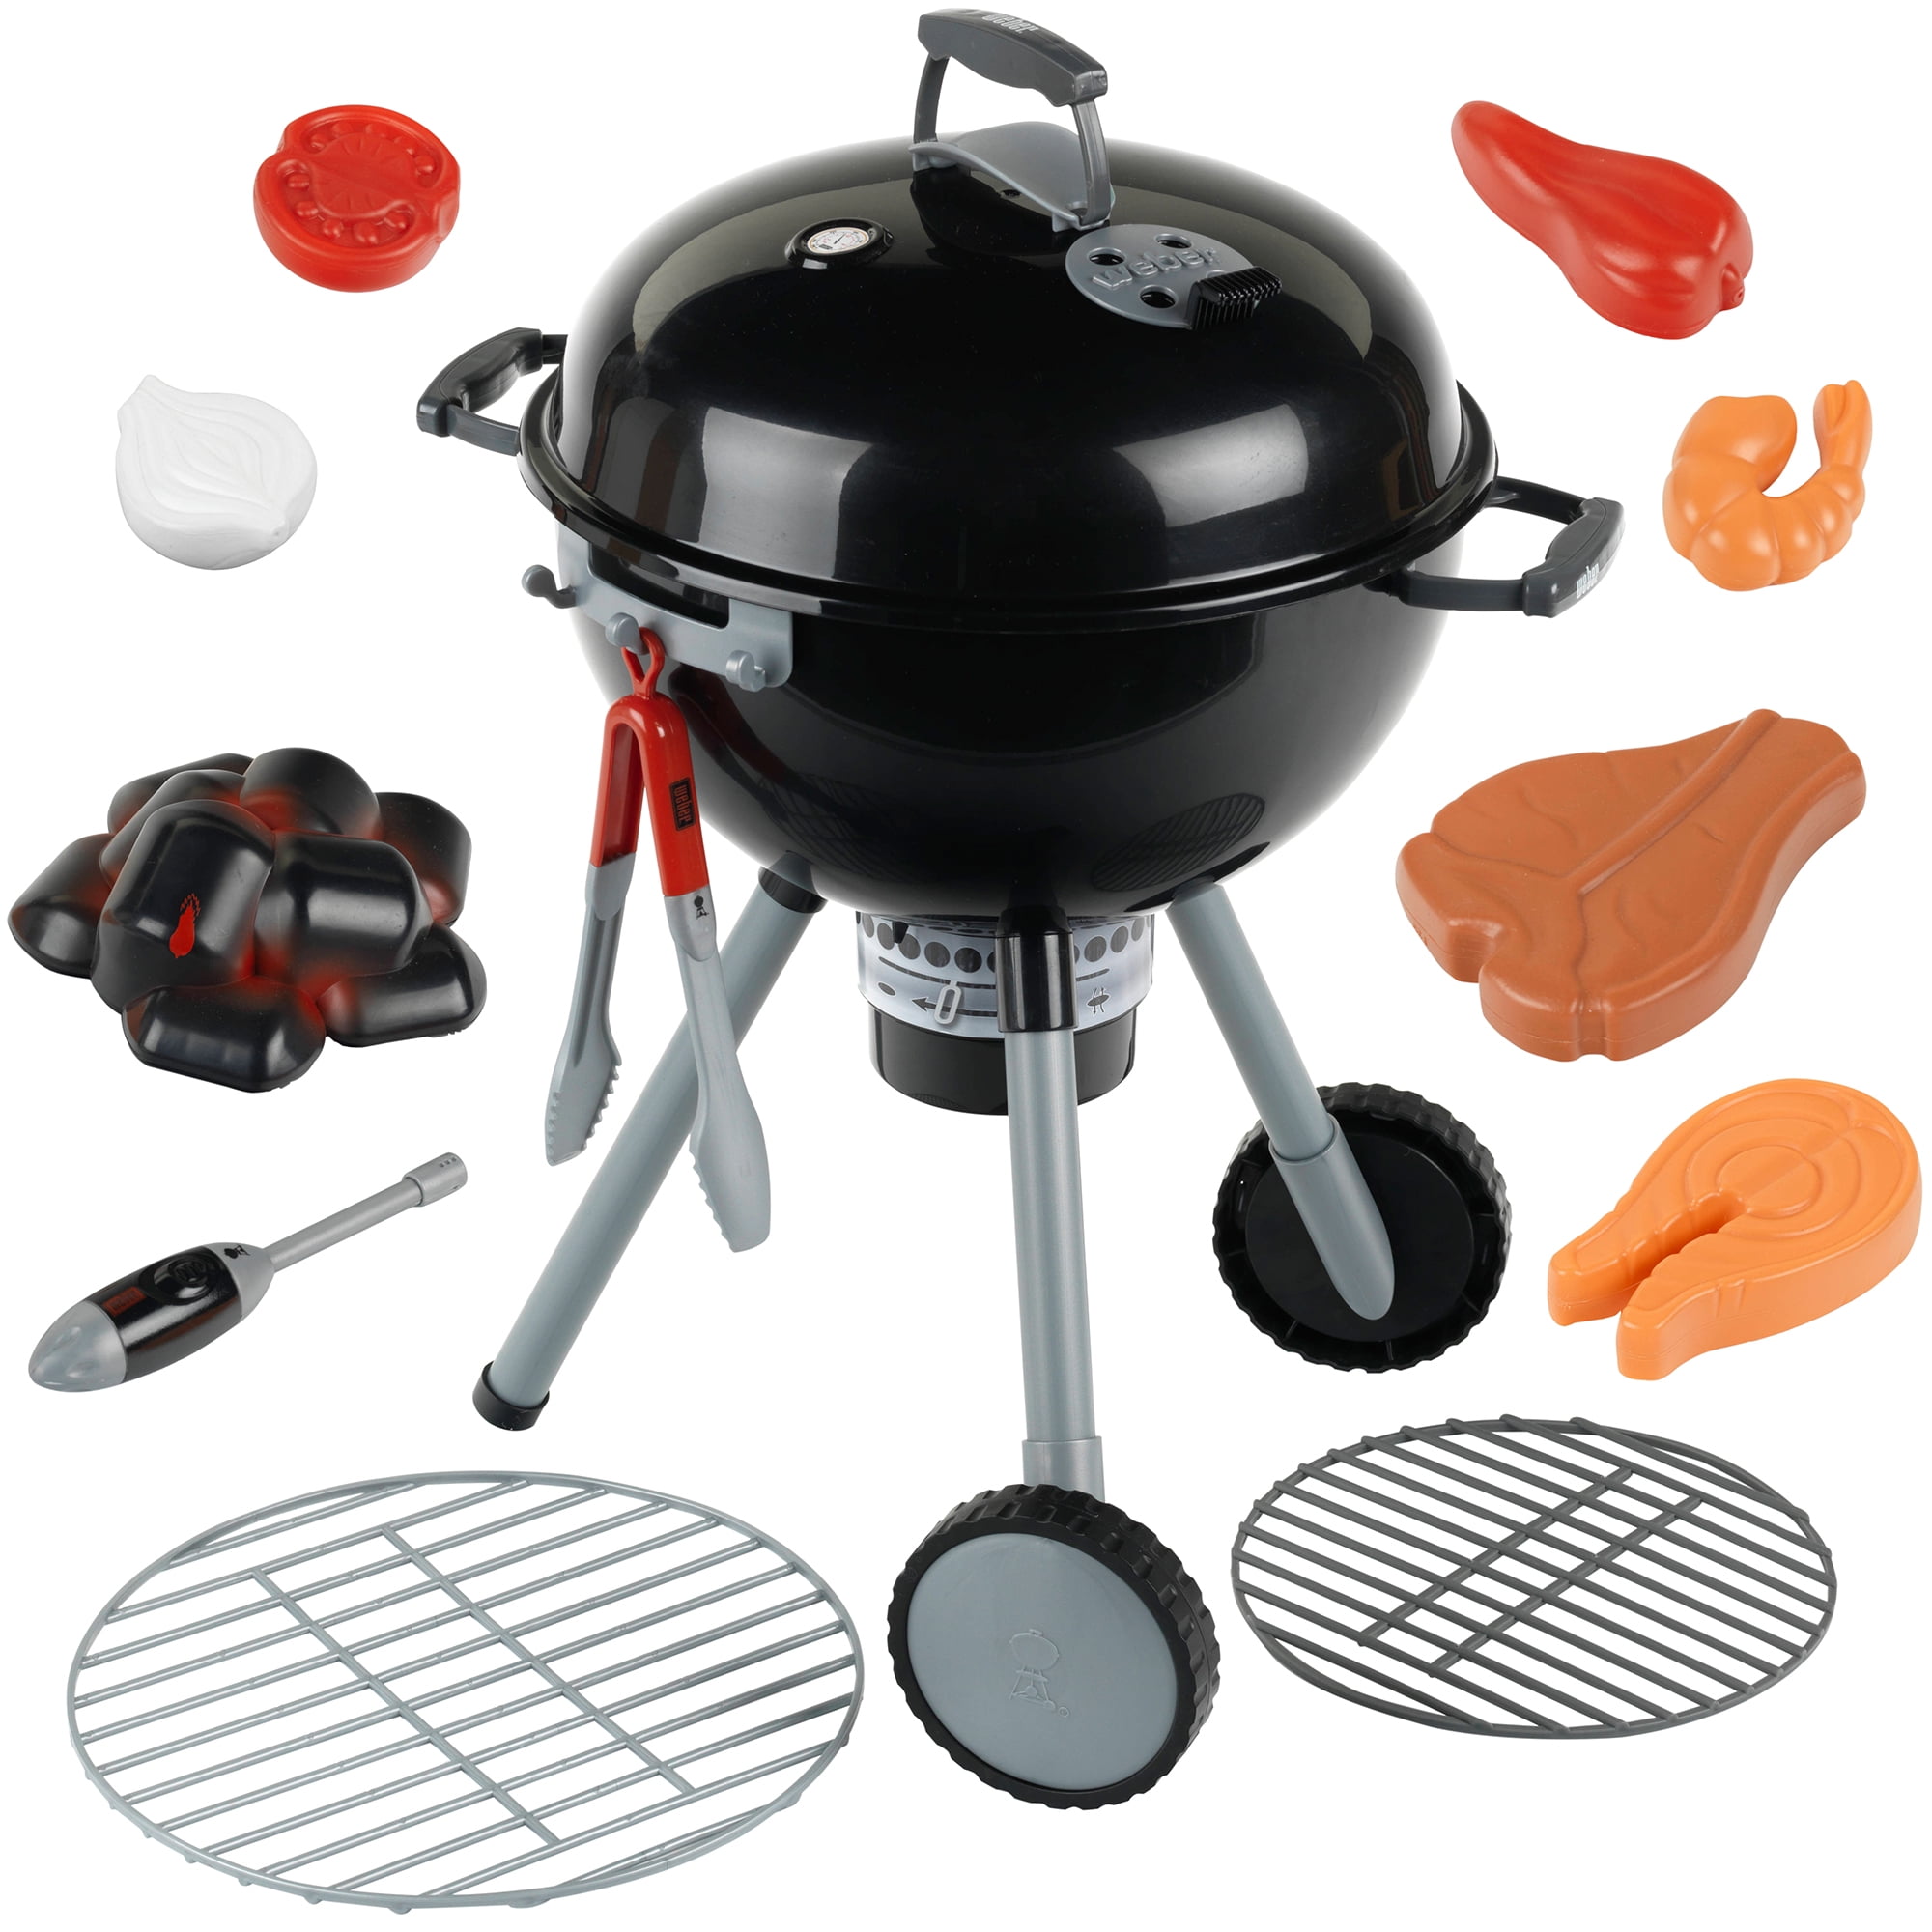 Theo Klein Pretend Play Weber Grill Cooking Set, Black 